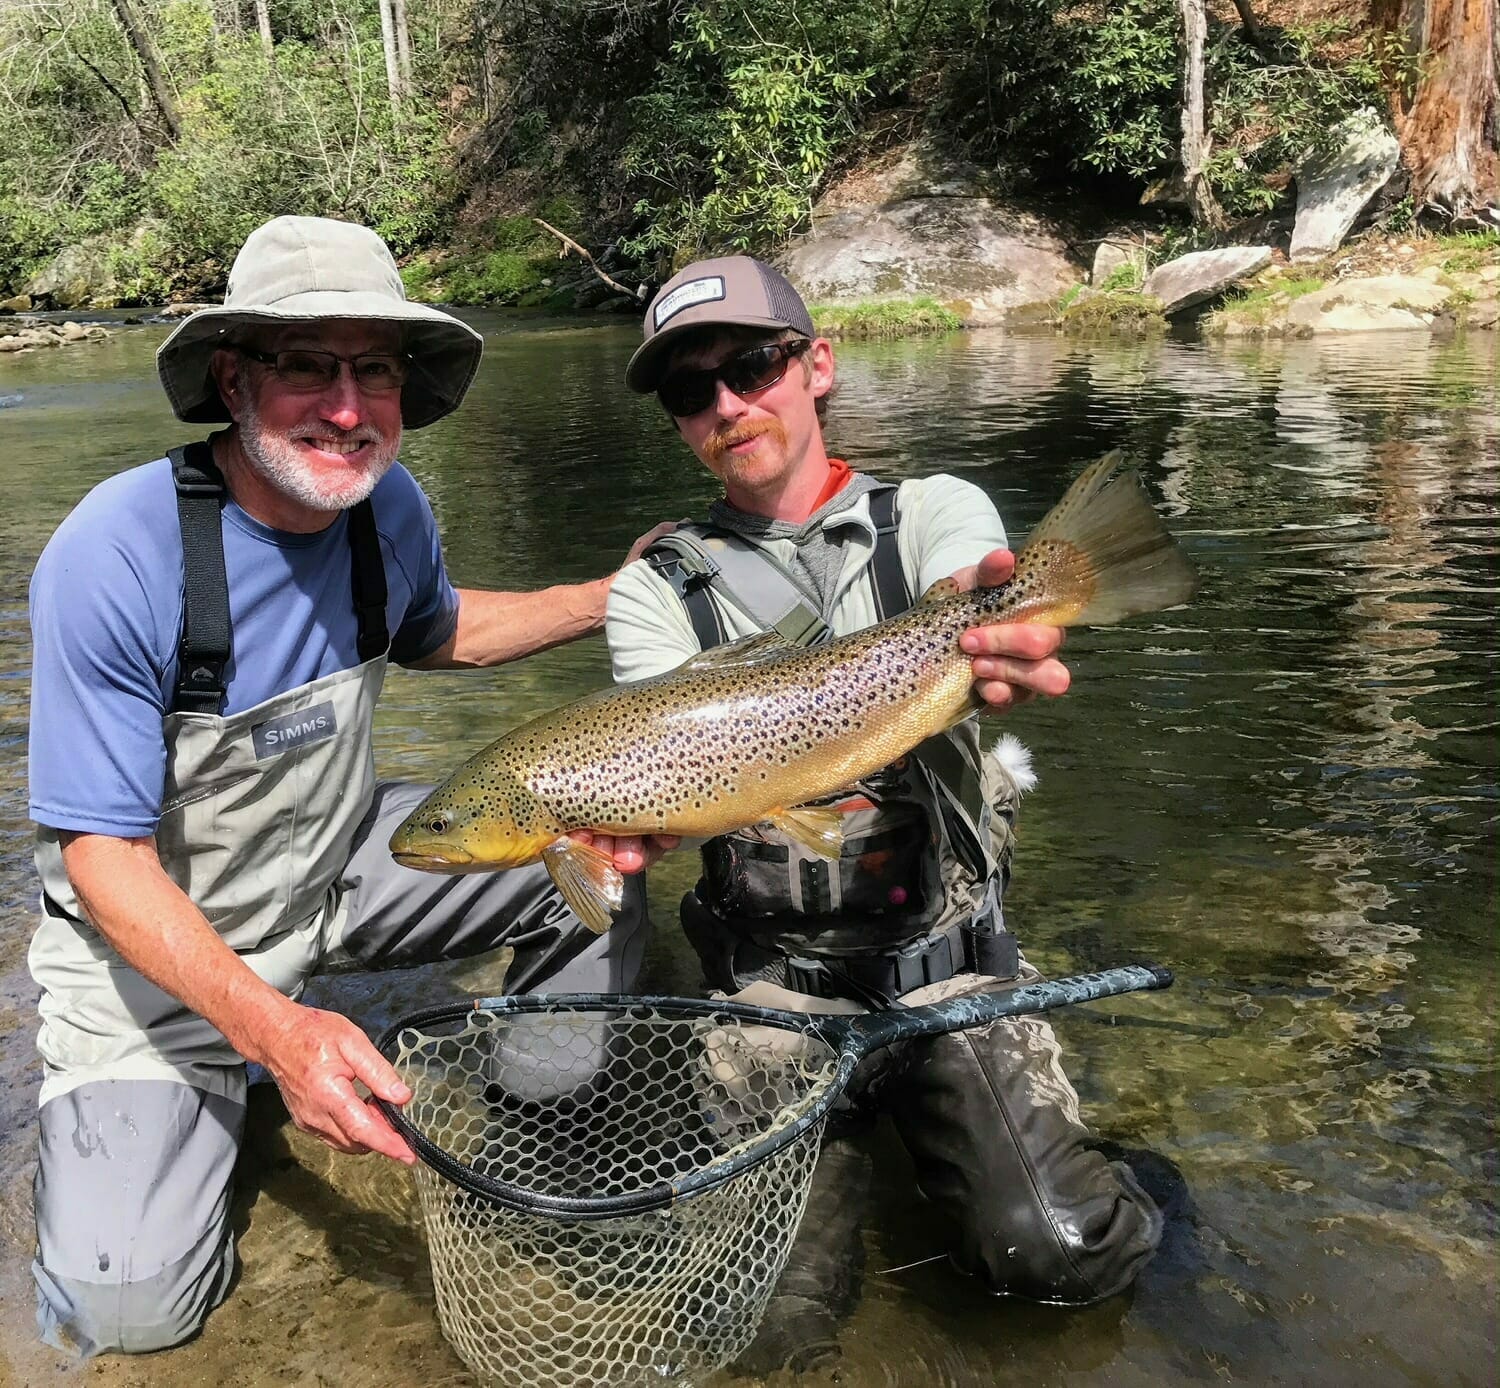 Local Rivers and Streams, Headwaters Outfitters